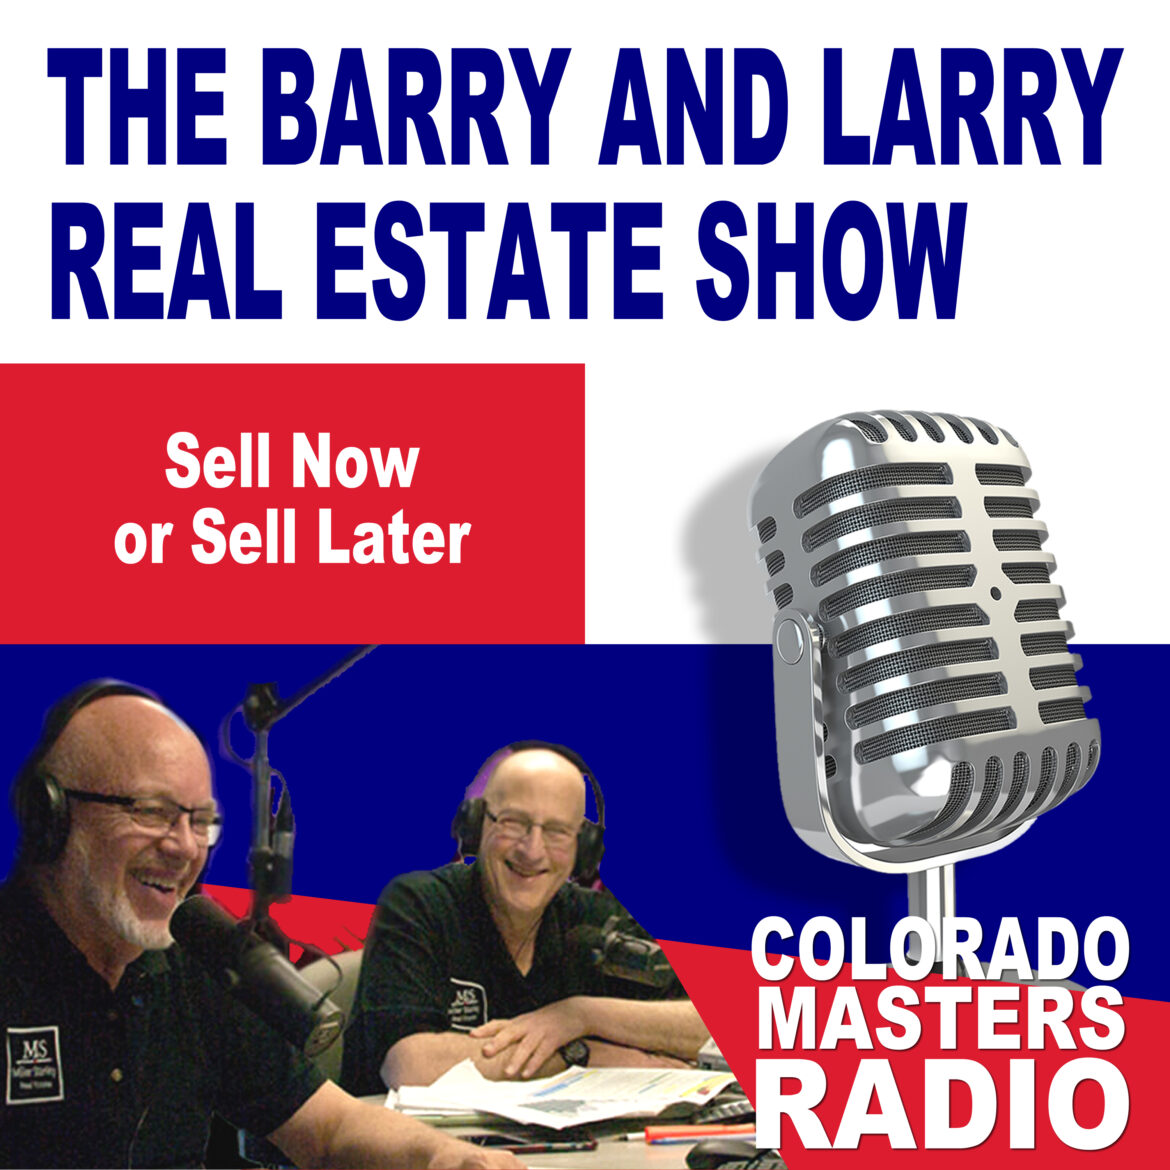 The Larry and Barry Real Estate Show - Sell Now or Sell Later